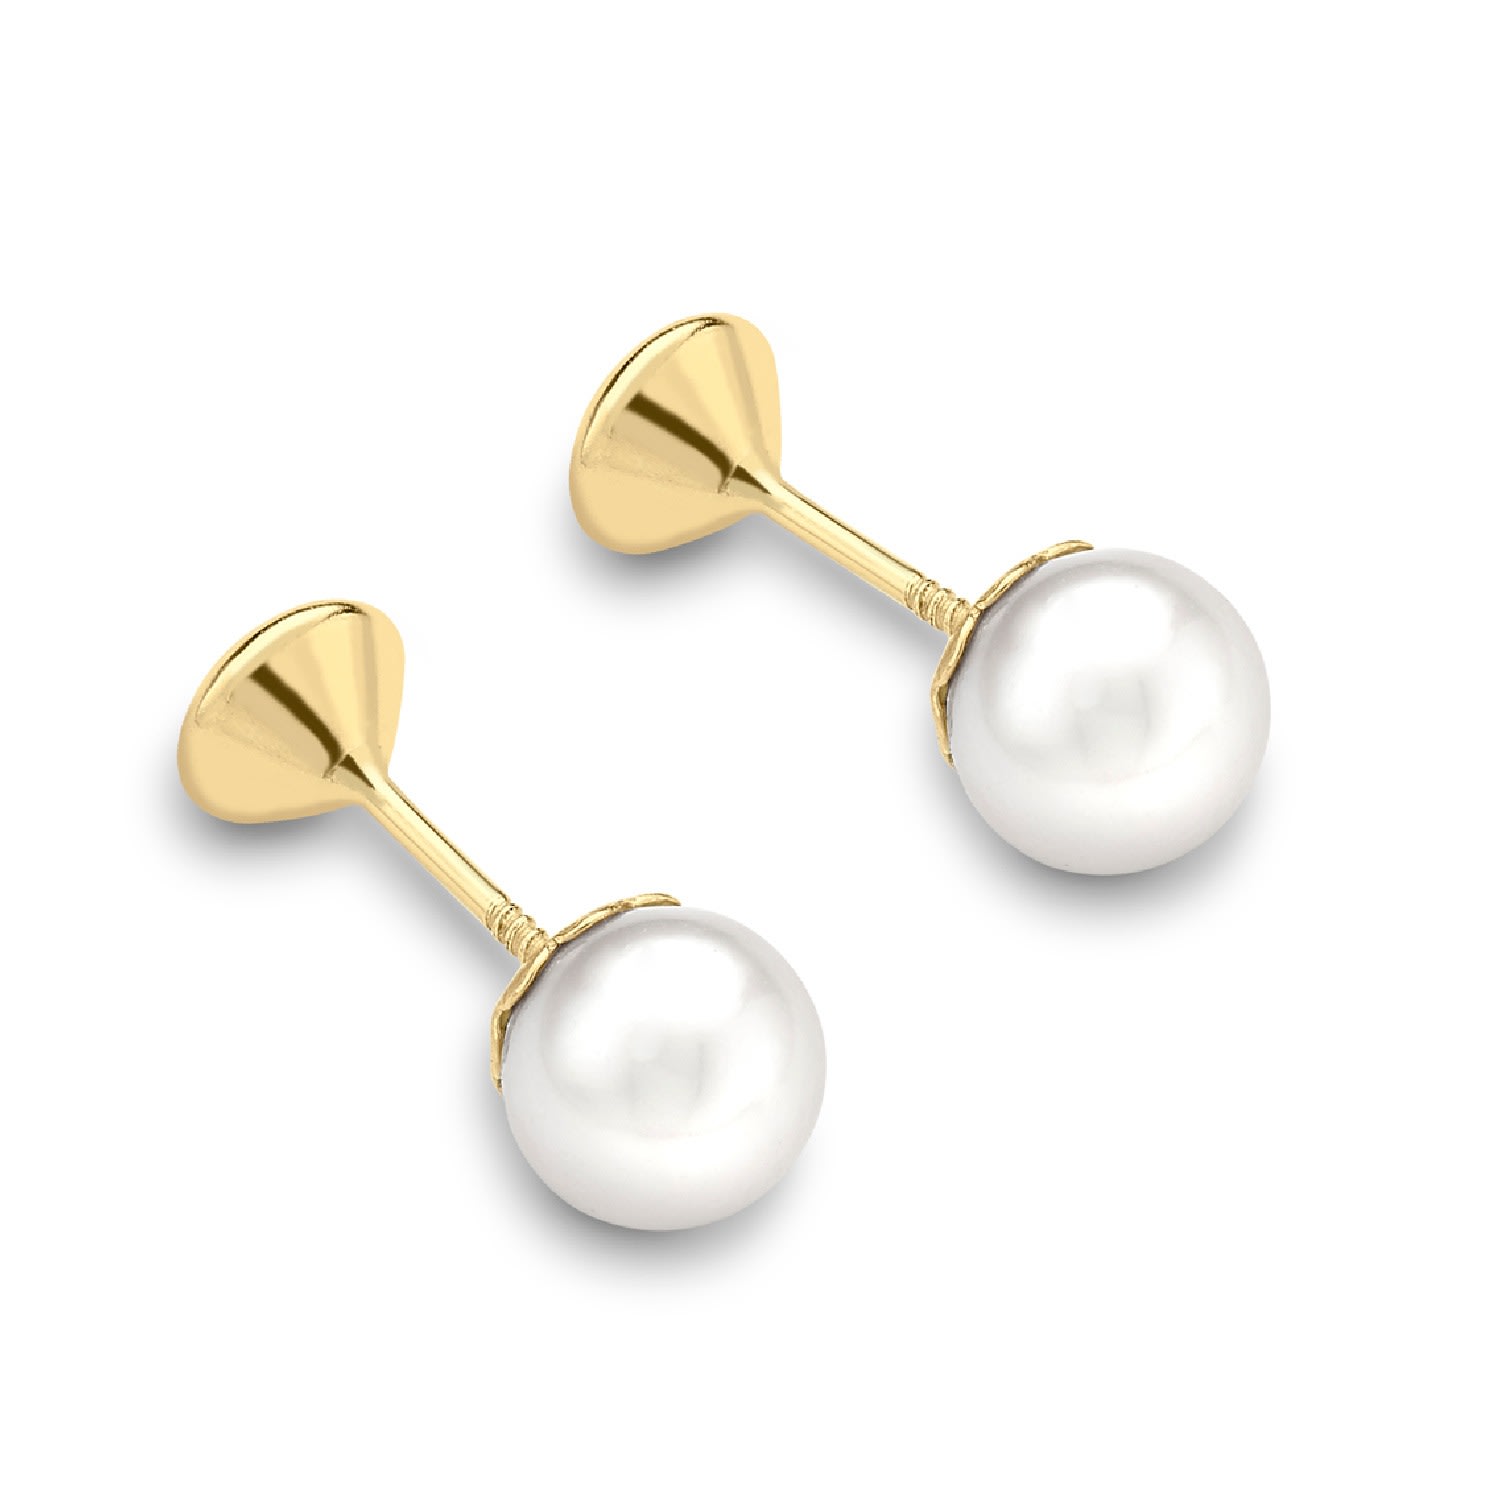 Posh Totty Designs Women's Gold Pearl And Cz Stud Earrings